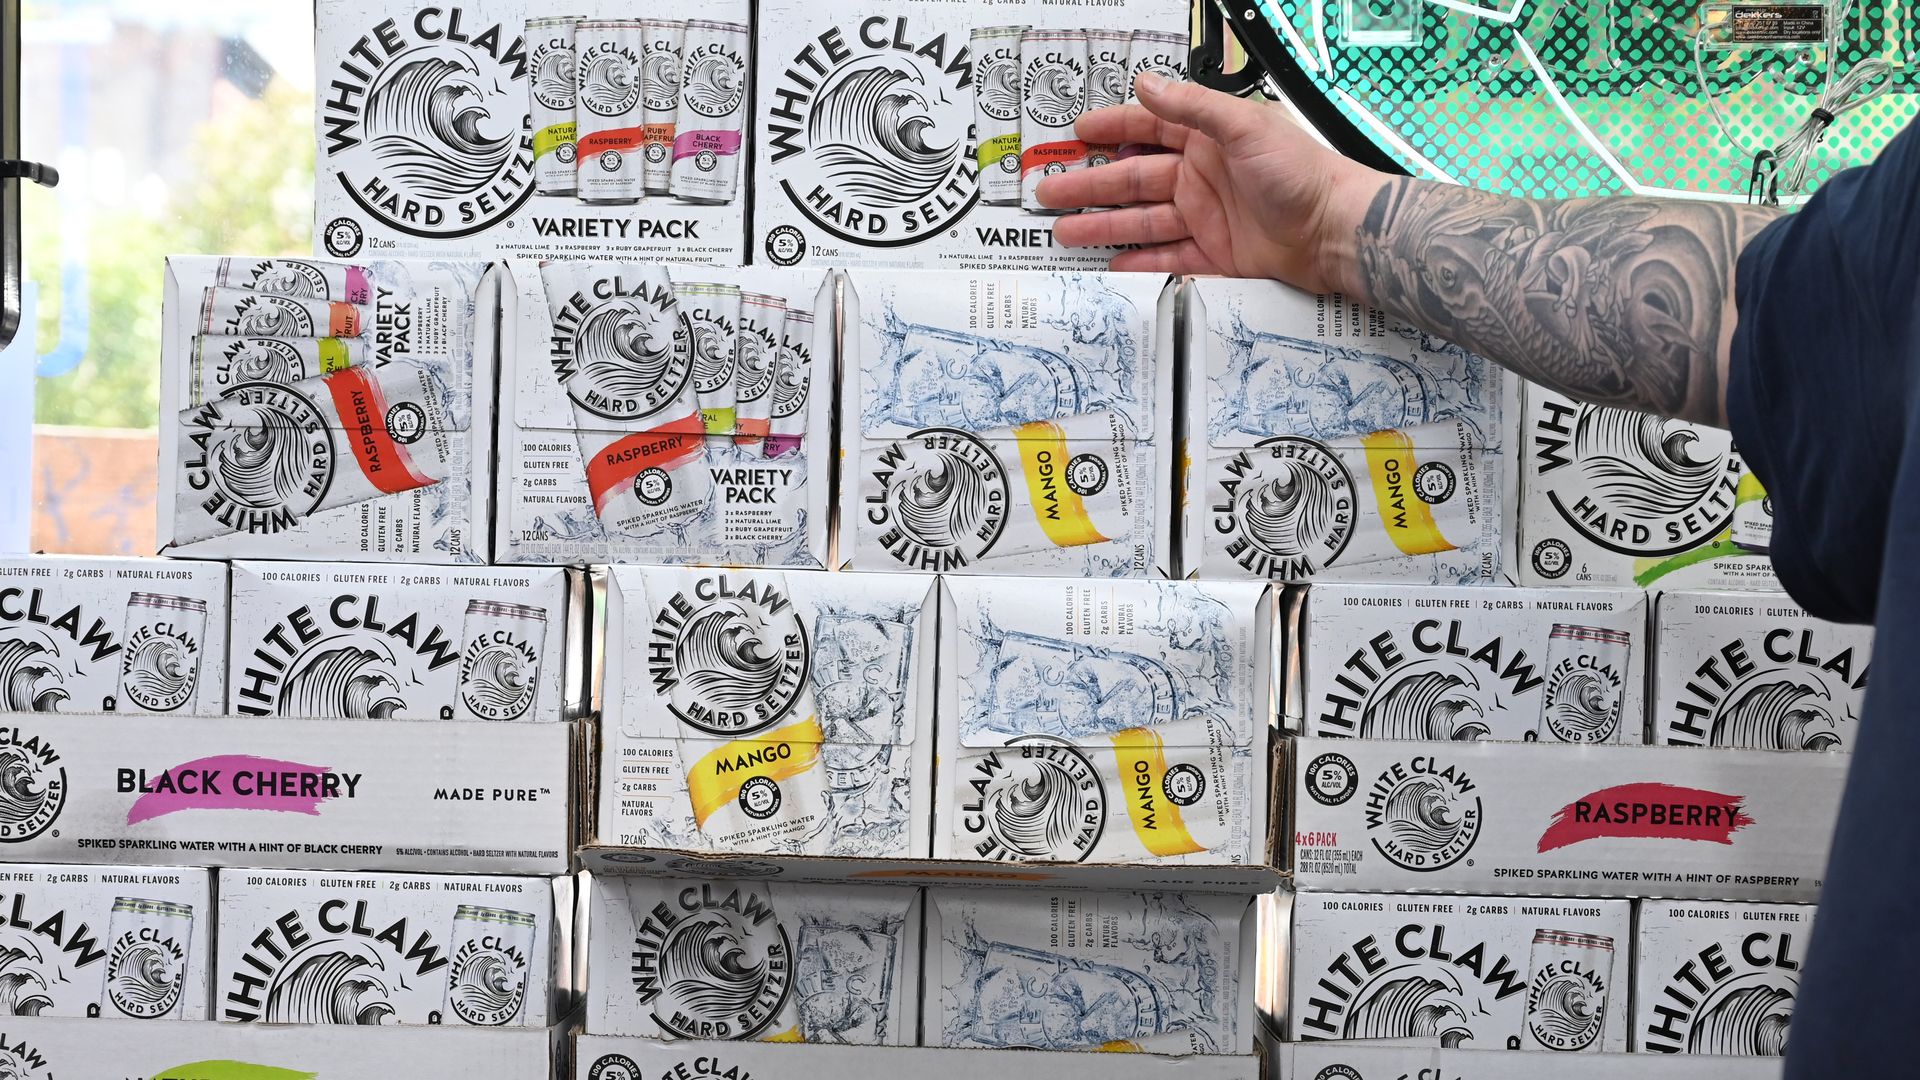 A stack of cases of White Claw